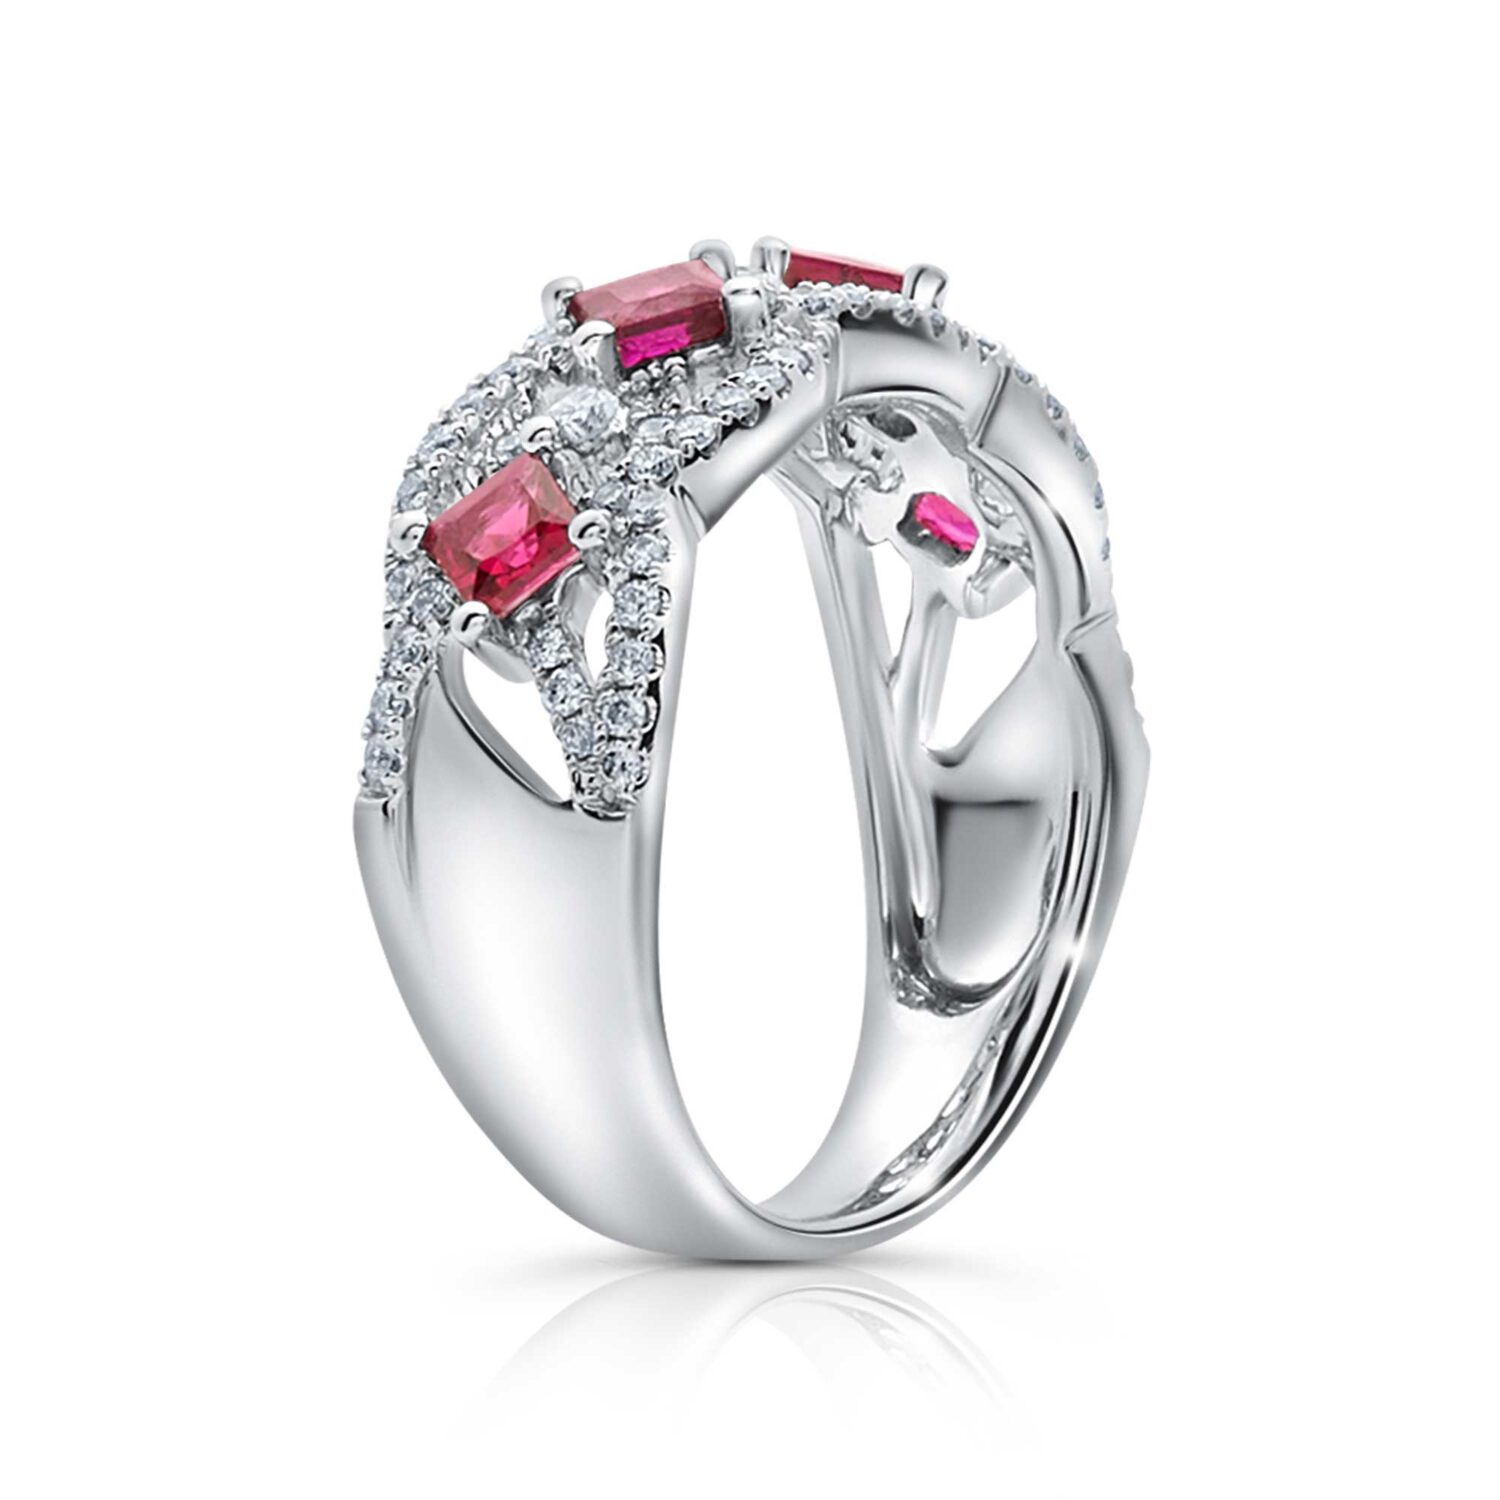 Ruby Ring - Richards Gems and Jewelry